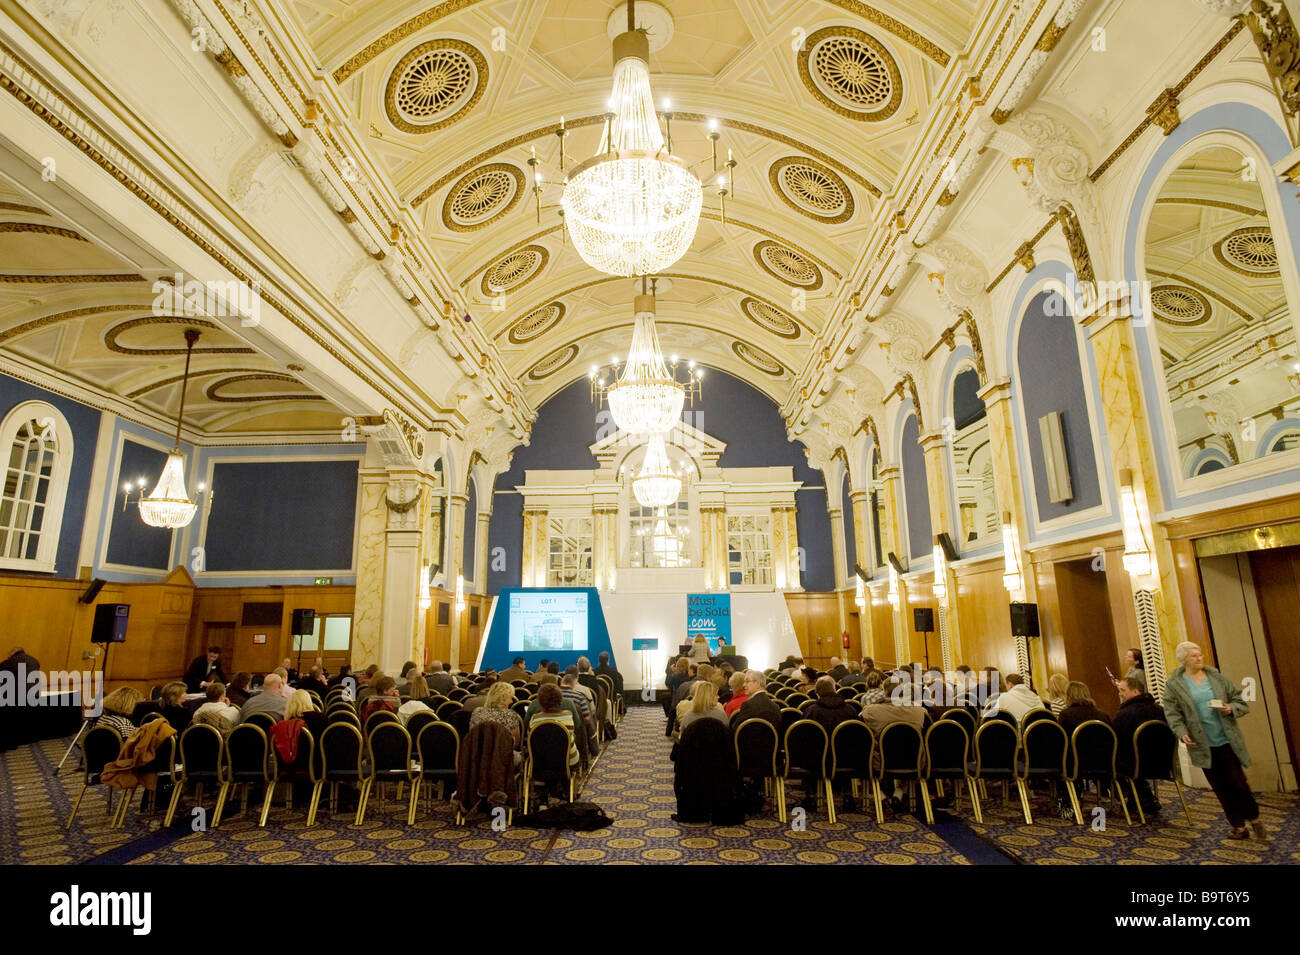 PROPERTY AUCTION BY MUSTBESOLD COM NEW CONNAUGHT ROOMS LONDON Stock Photo